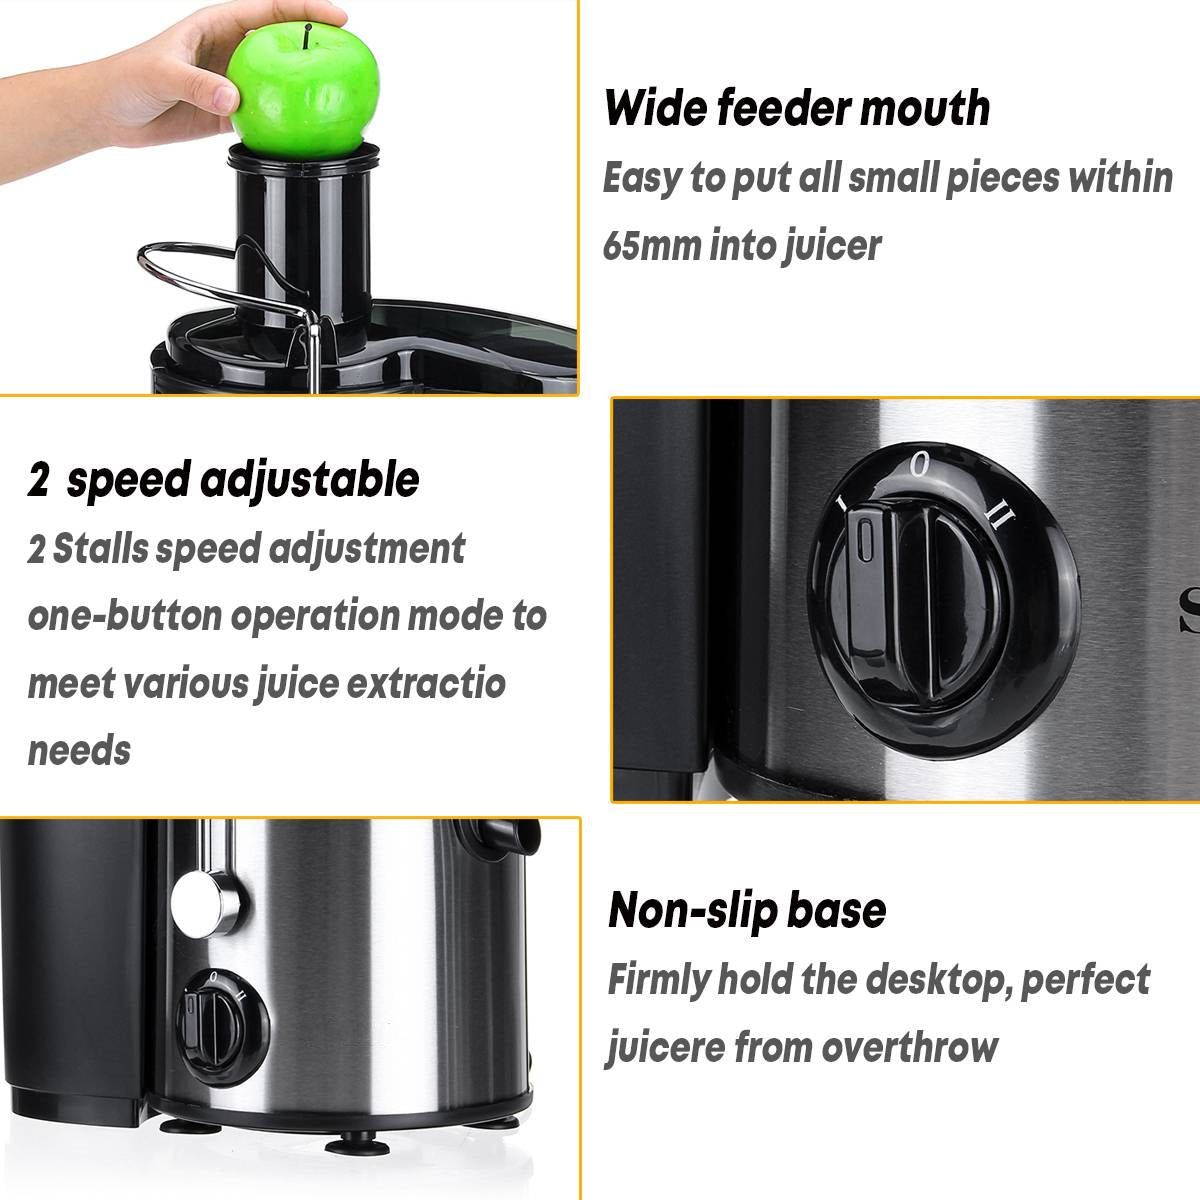 800W High Output Electric juicer